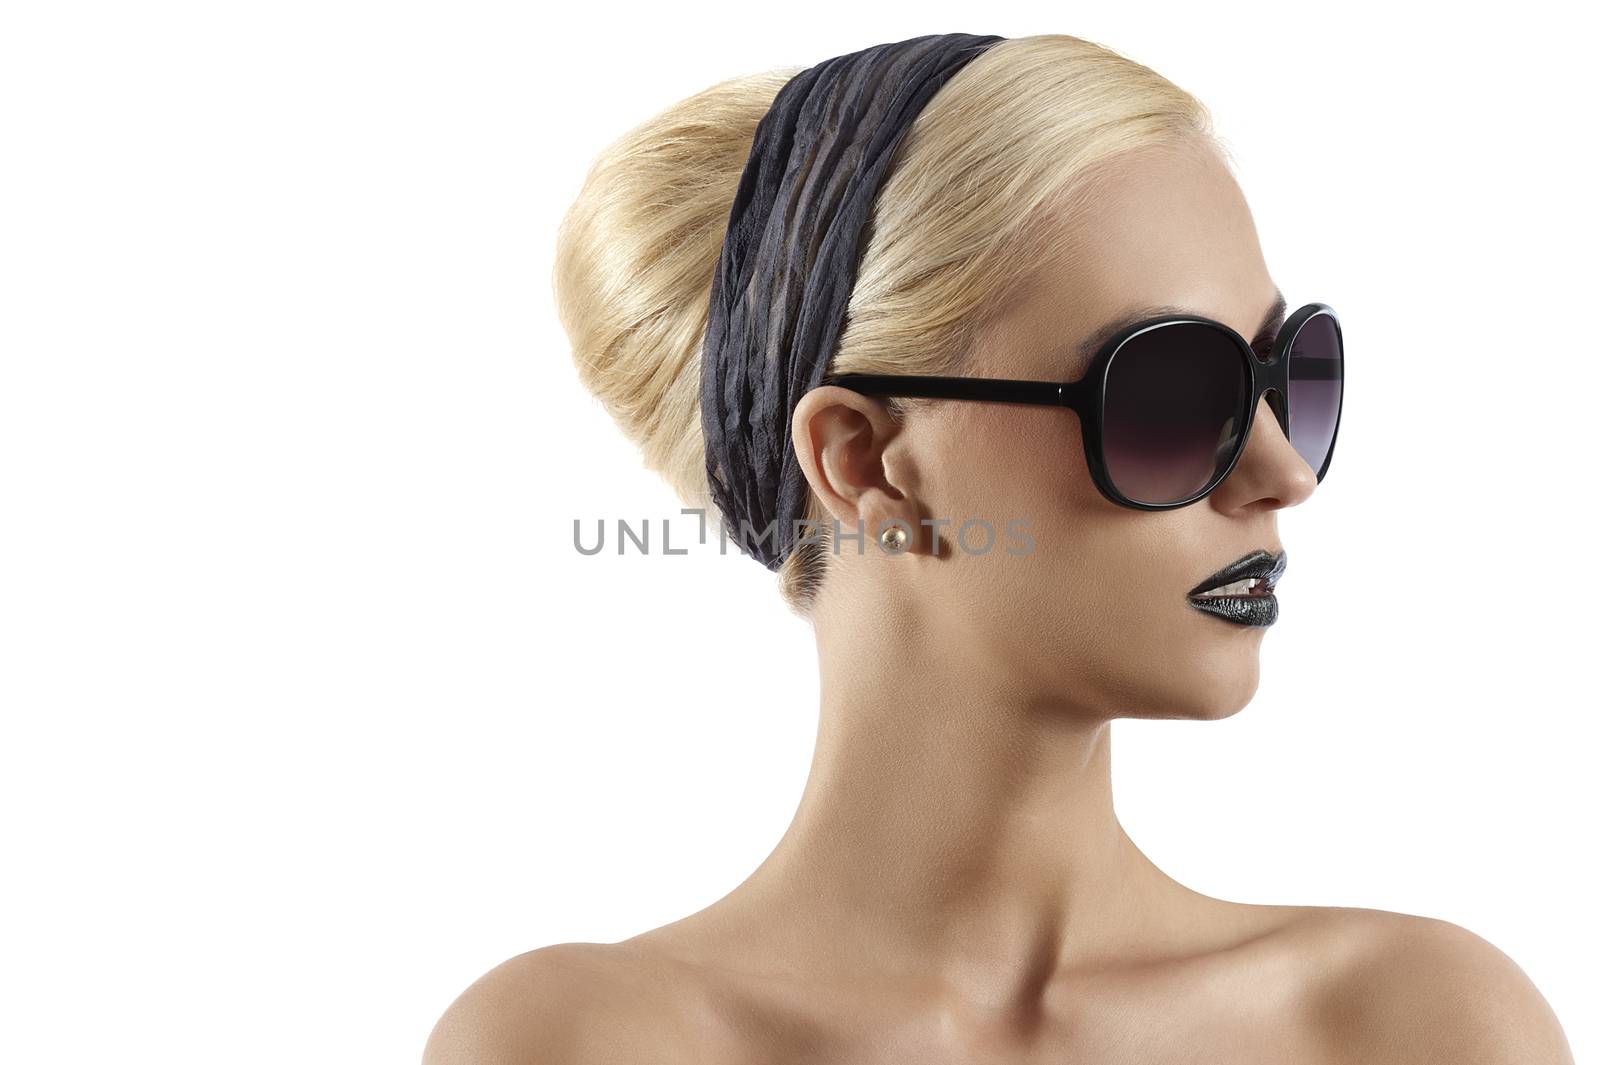 fashion shot of blond girl with sunglasses against white backgro by fotoCD